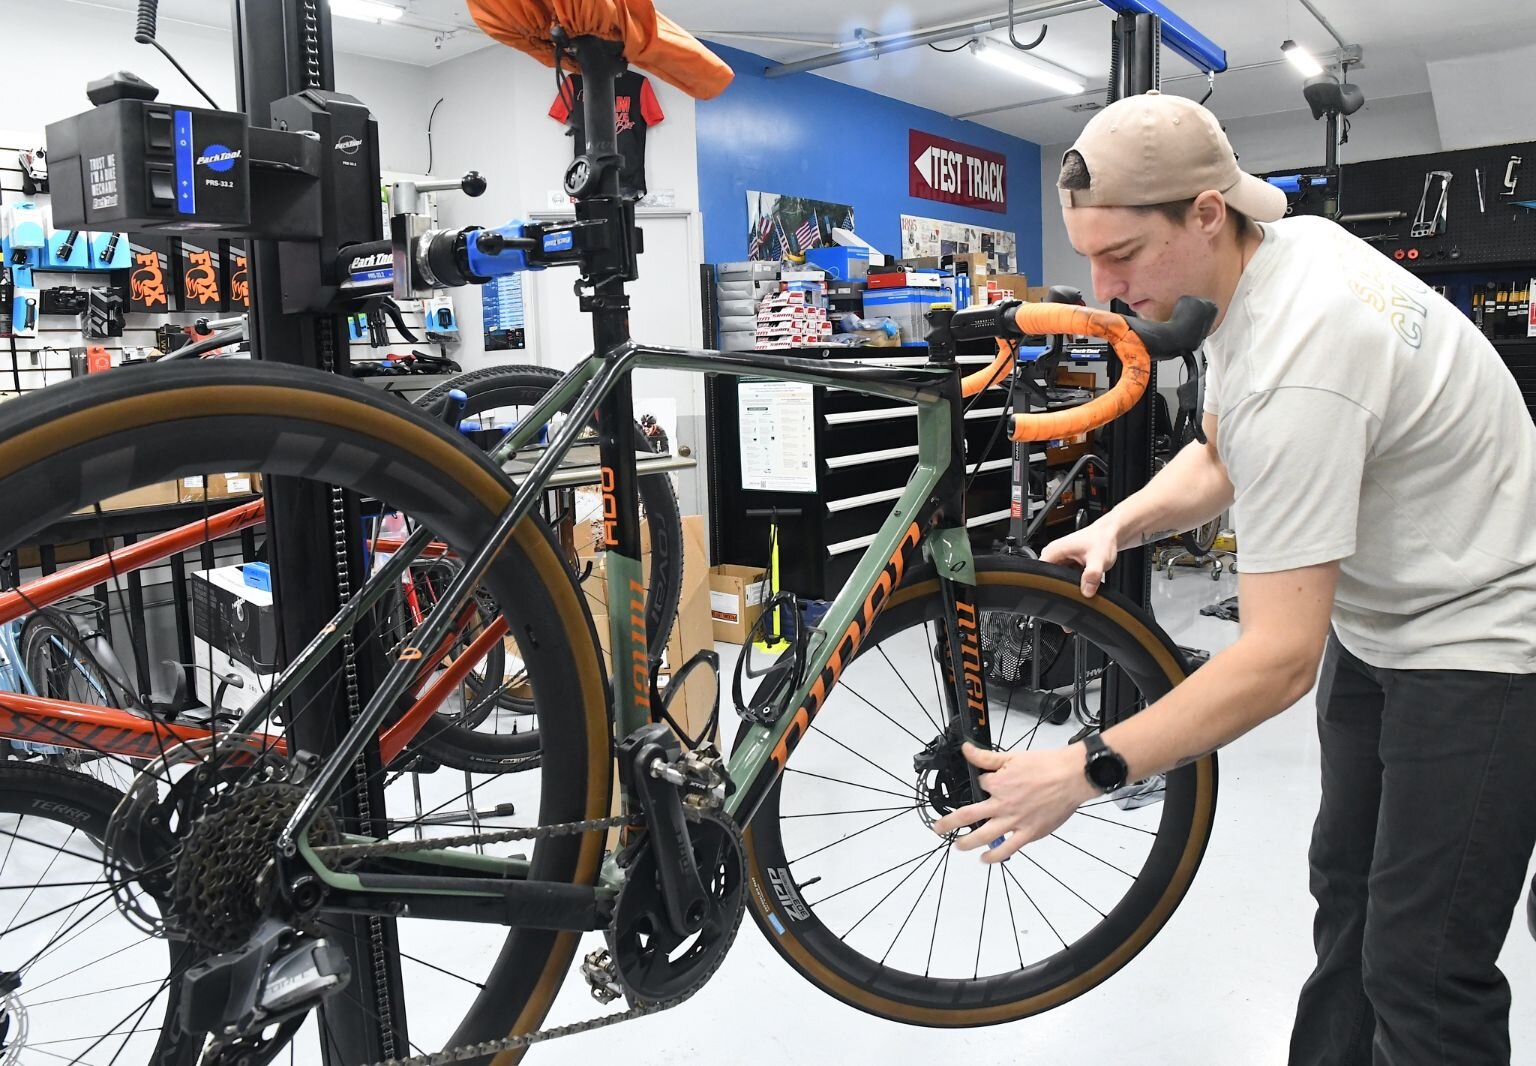 Jason Fraley works on a bike at Mike’s Team Active Bikes, 22 W. Michigan in downtown Battle Creek.